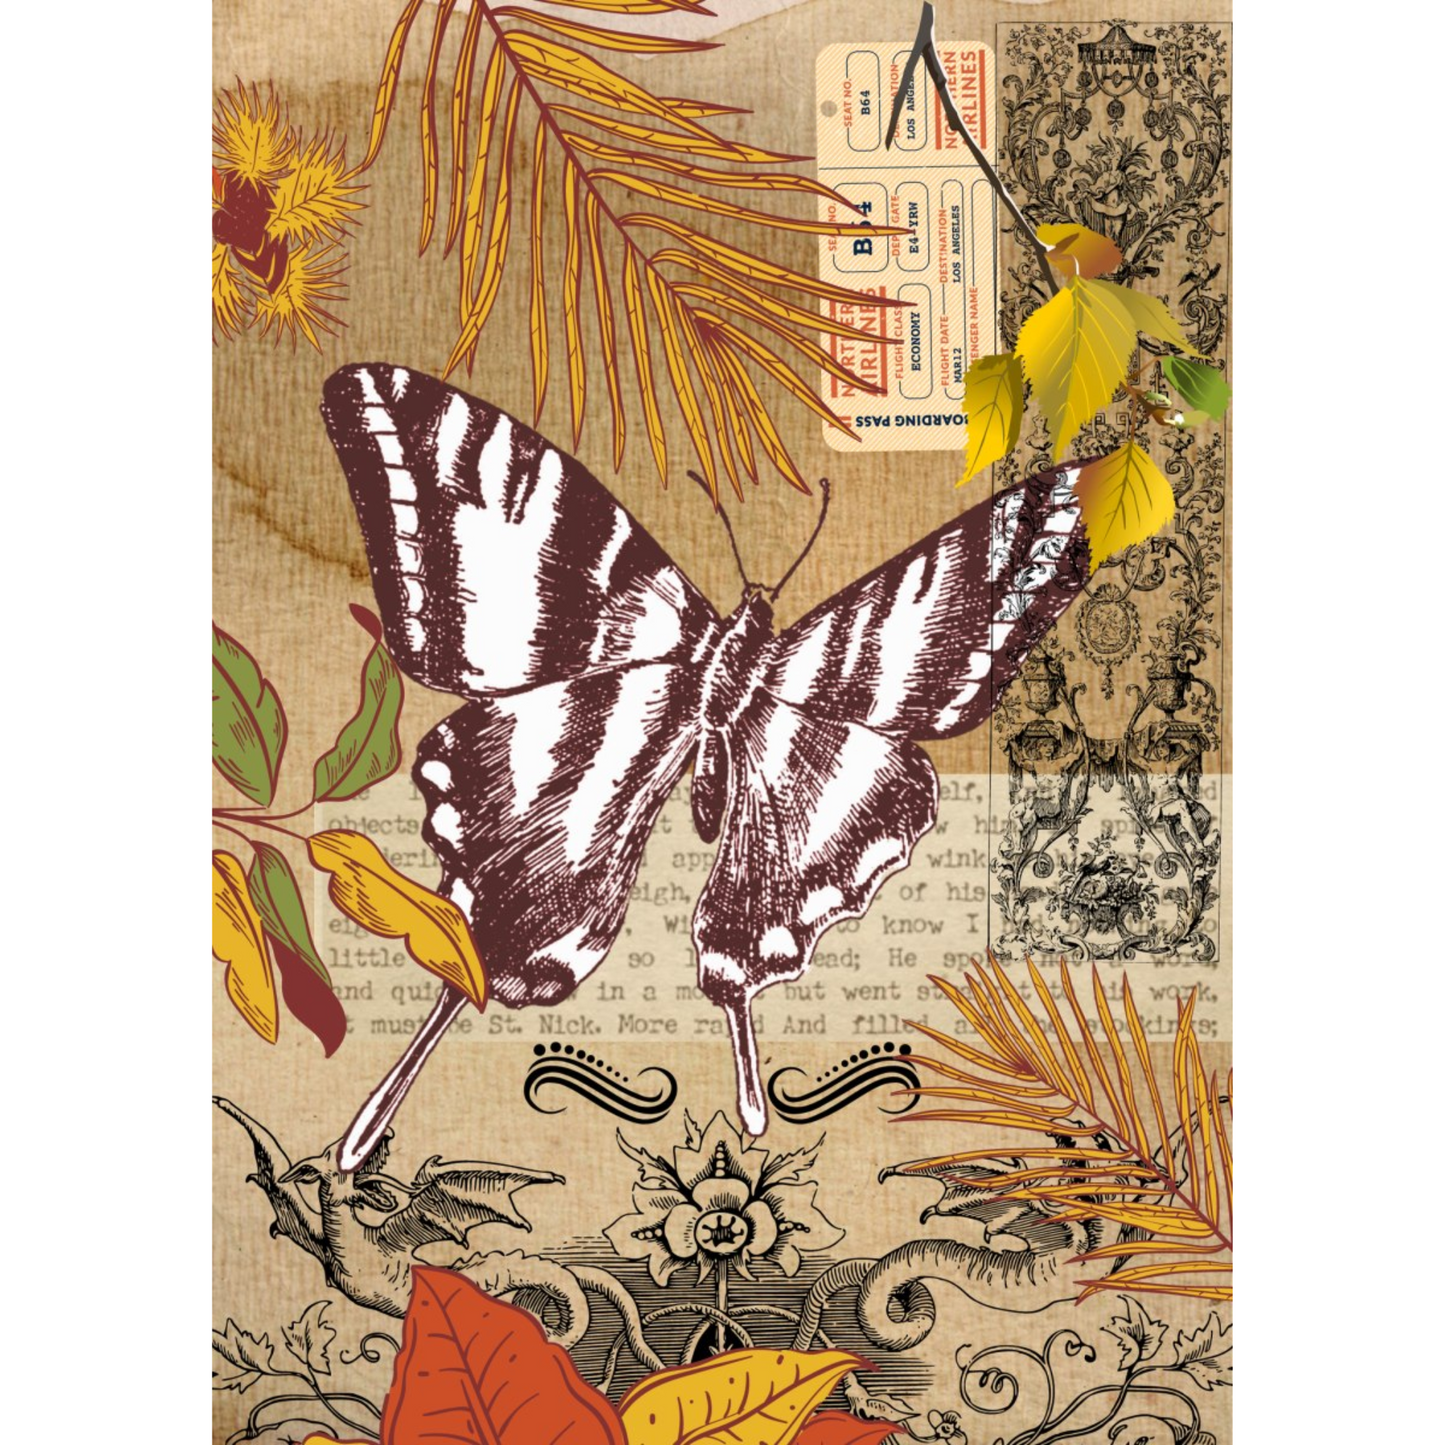 "Skulduggery" decoupage paper set by Made by Marley available at Milton's Daughter. Photo depicts single sheet of butterfly and nature images superimposed over printed ephemera included in this 3-piece set.